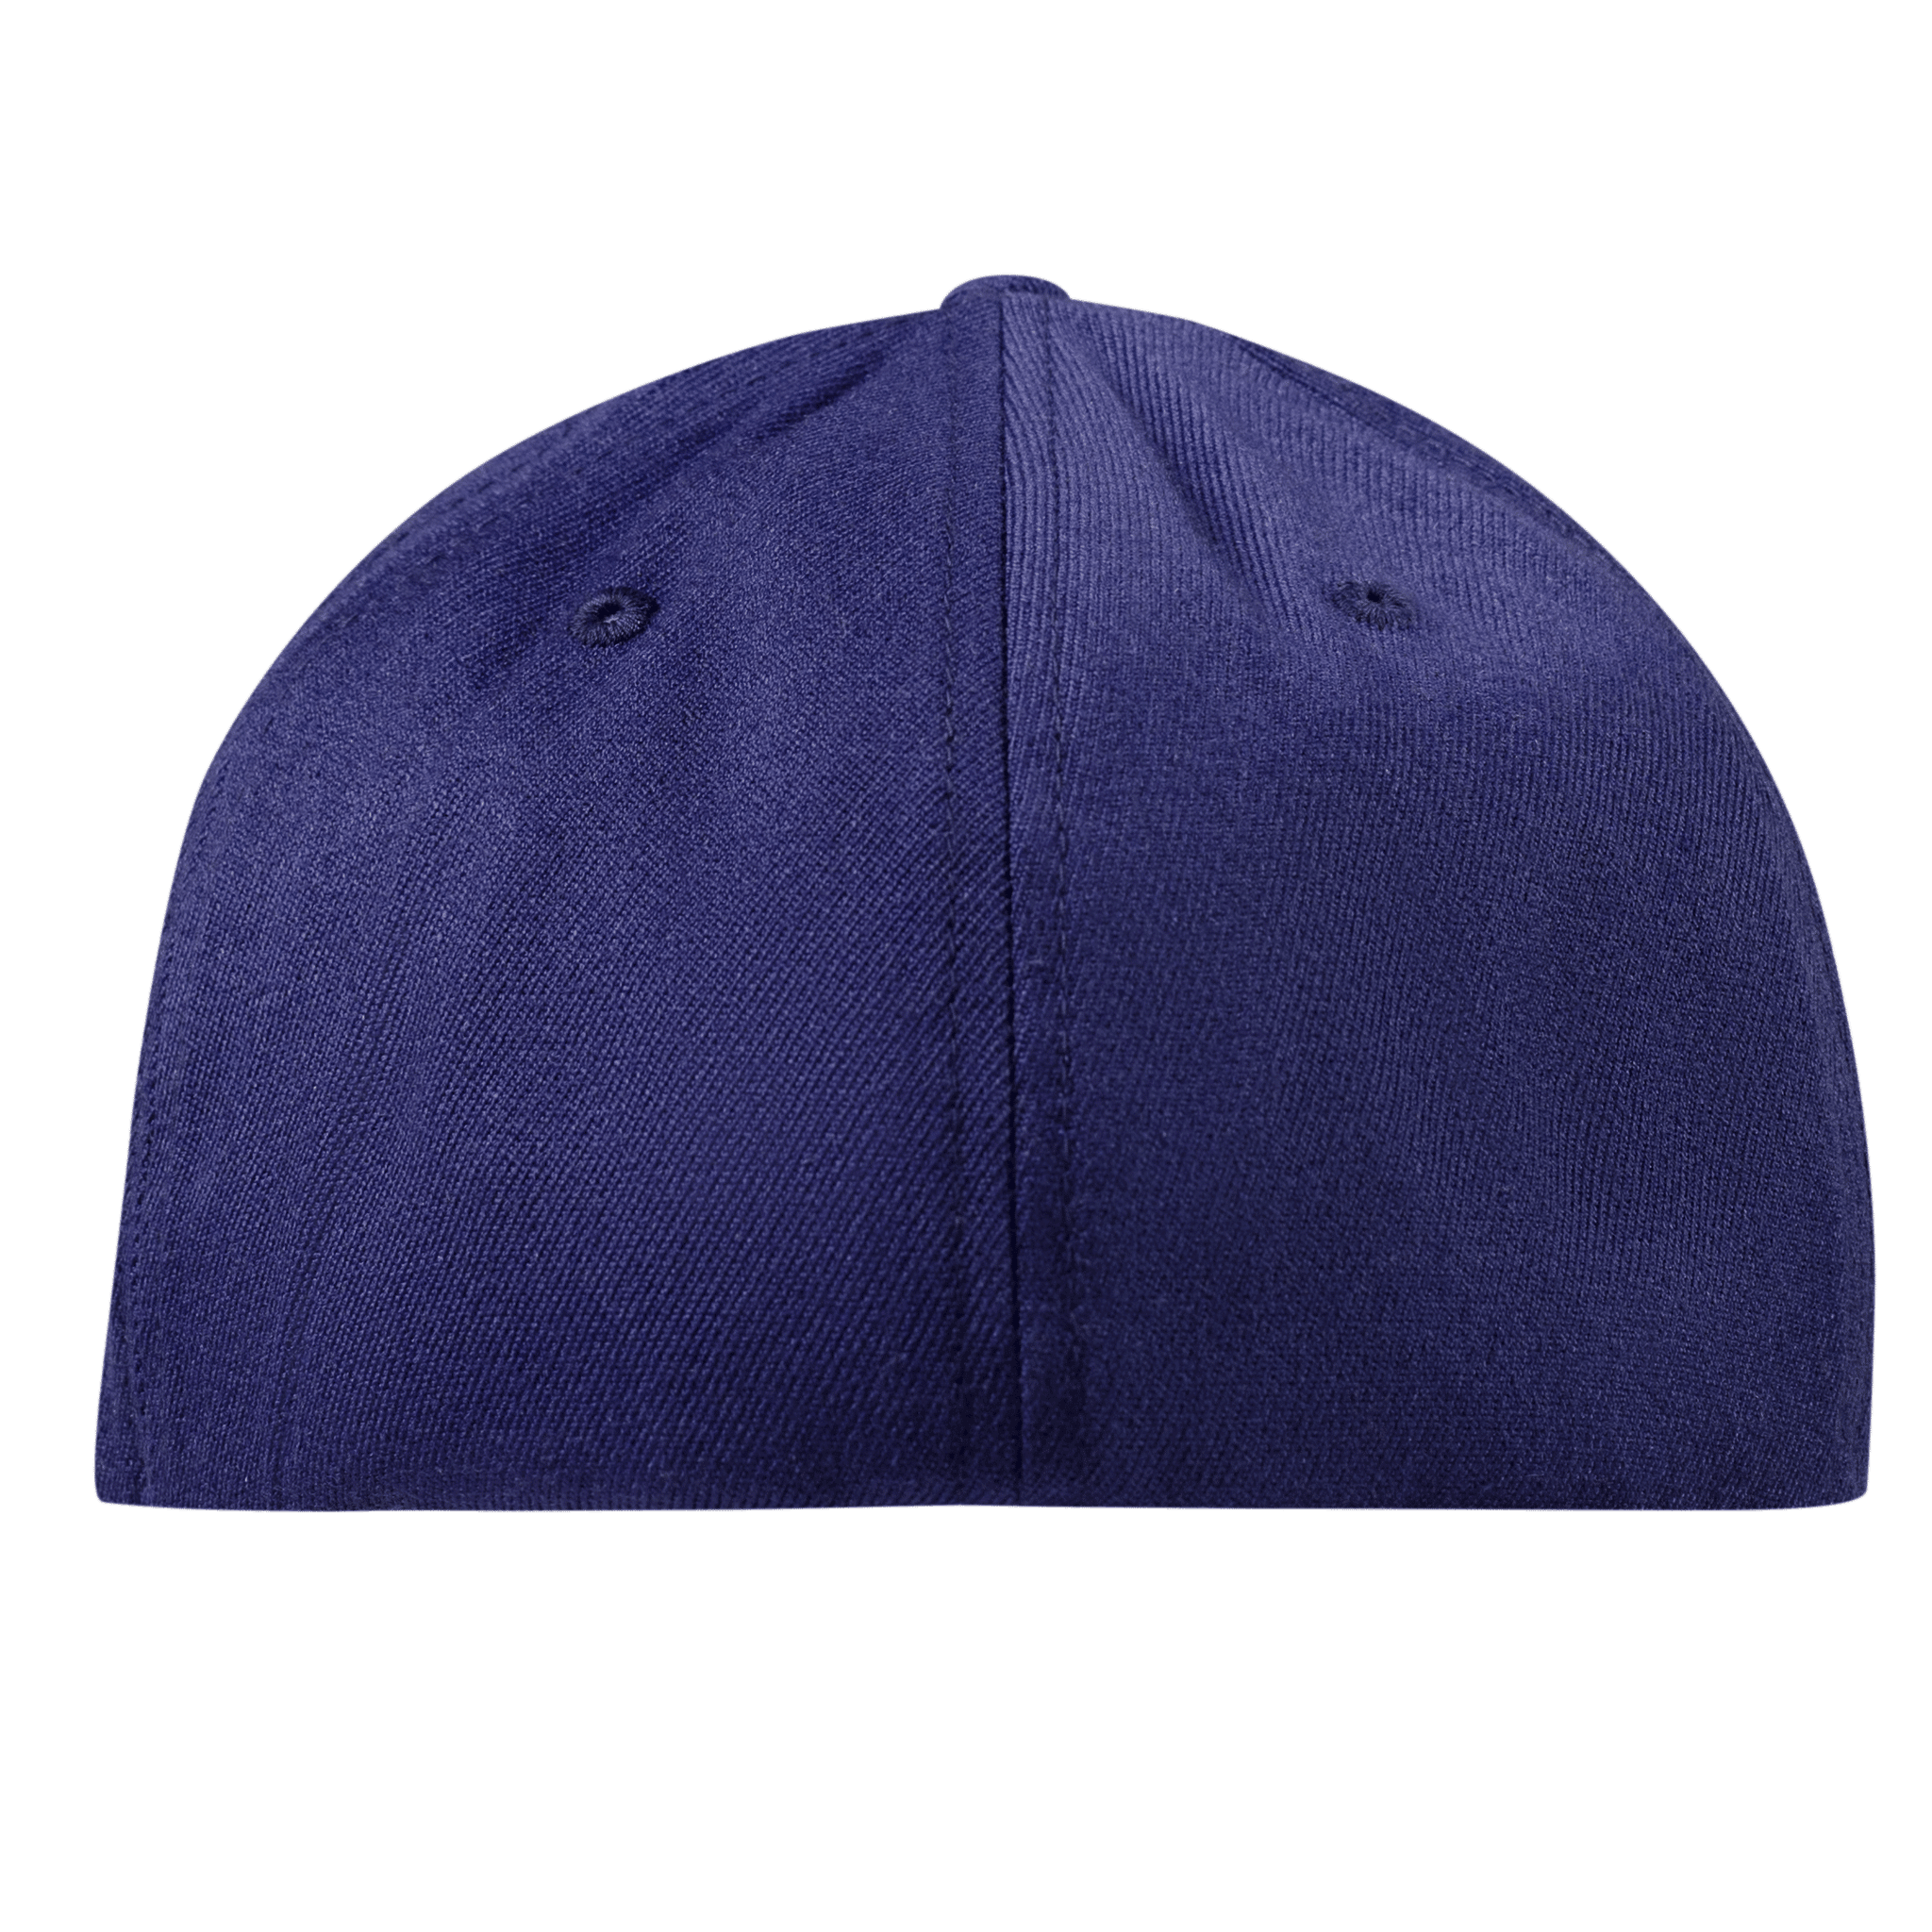 Michigan Patriot Flexfit Fitted Back Navy